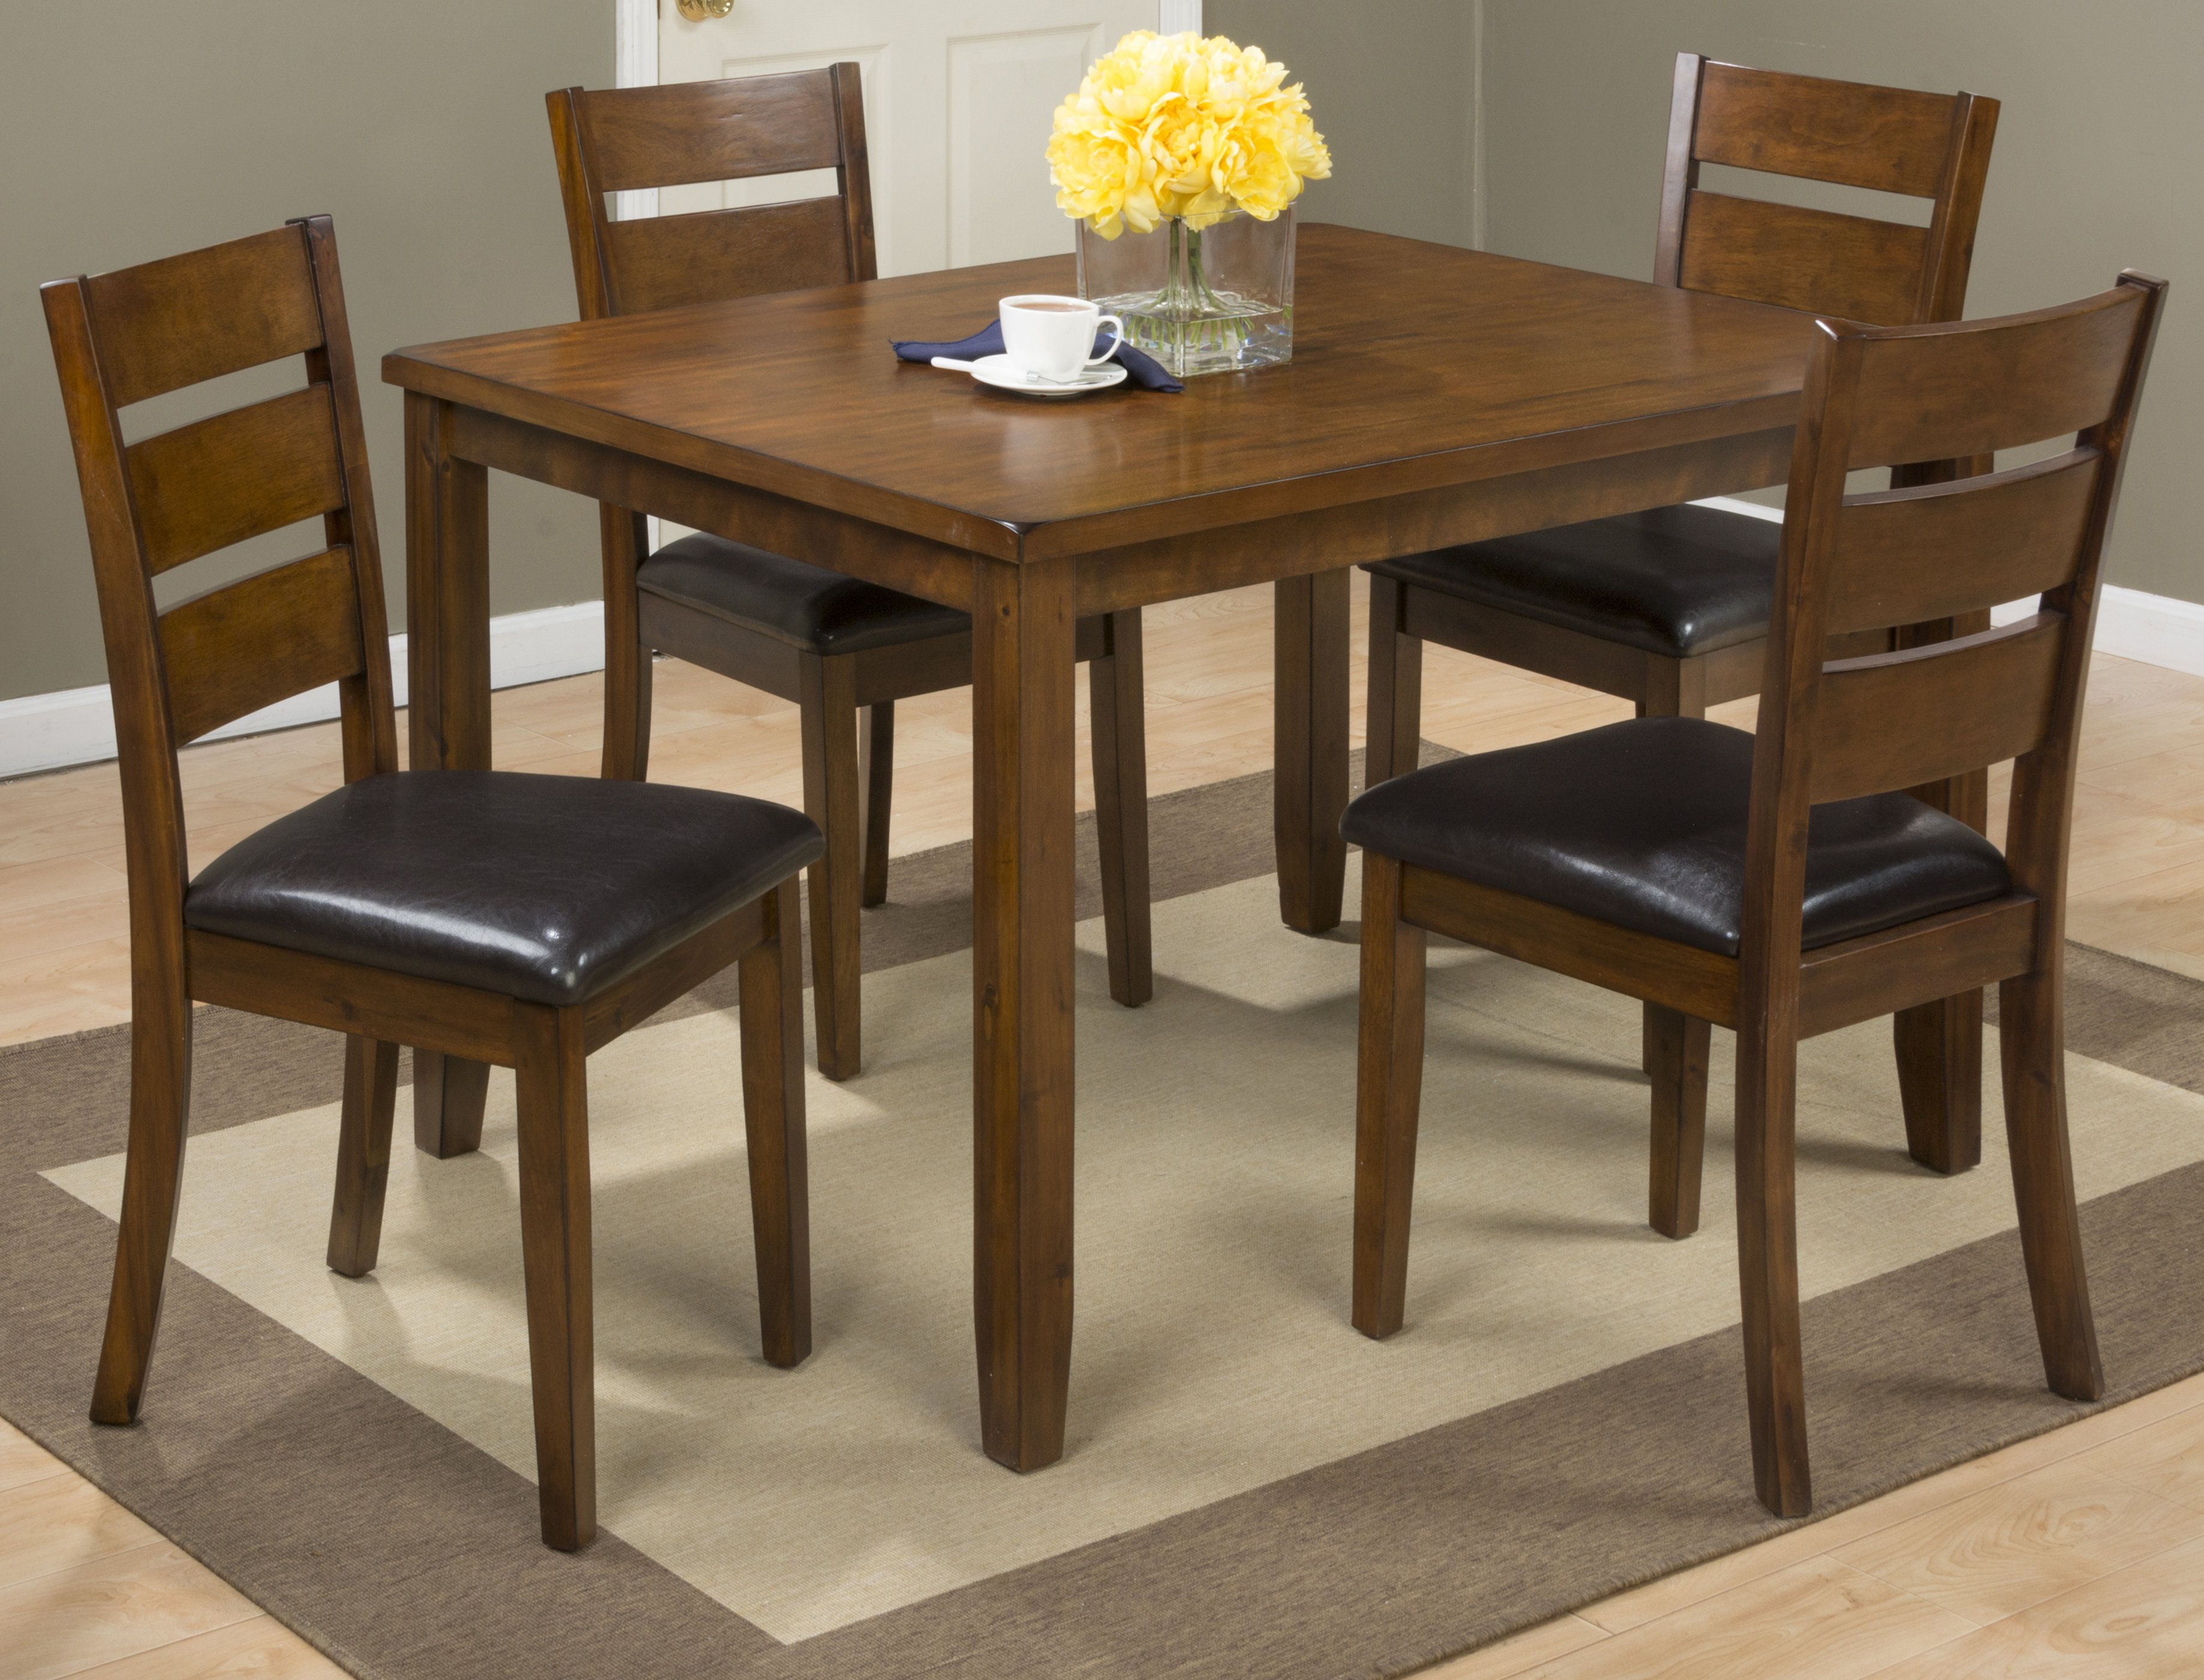 Amir 5 Piece Solid Wood Dining Set Within Most Popular Amir 5 Piece Solid Wood Dining Sets (Set Of 5) (View 1 of 20)